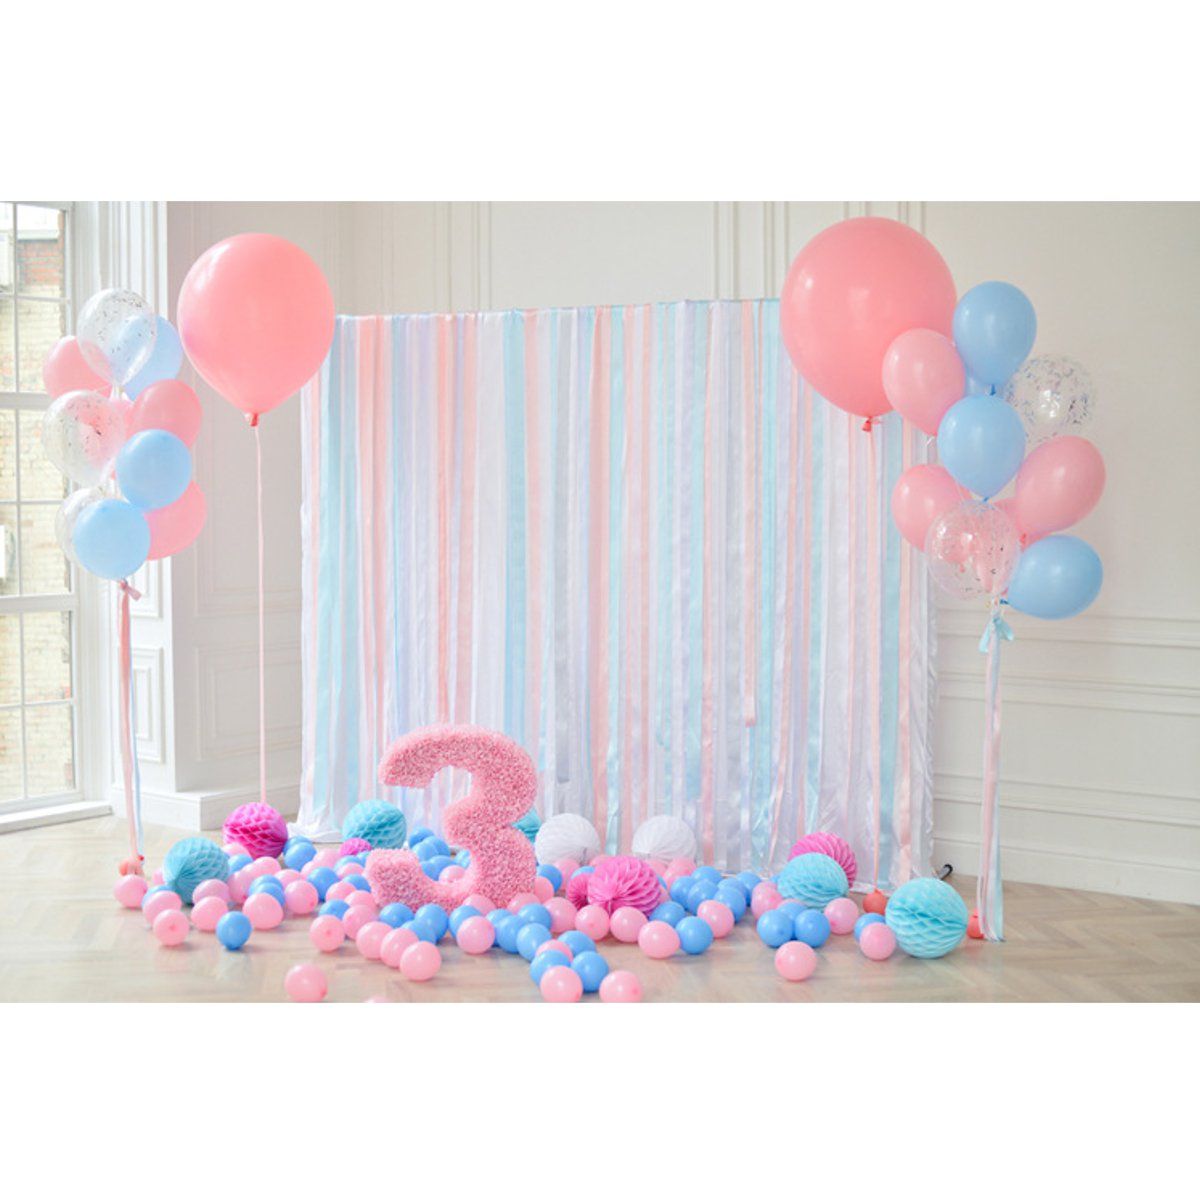 5x3FT-7x5FT-9x6FT-Vinyl-Pink-Blue-Balloon-3-Years-Old-Birthday-Photography-Backdrop-Background-Studi-1635482